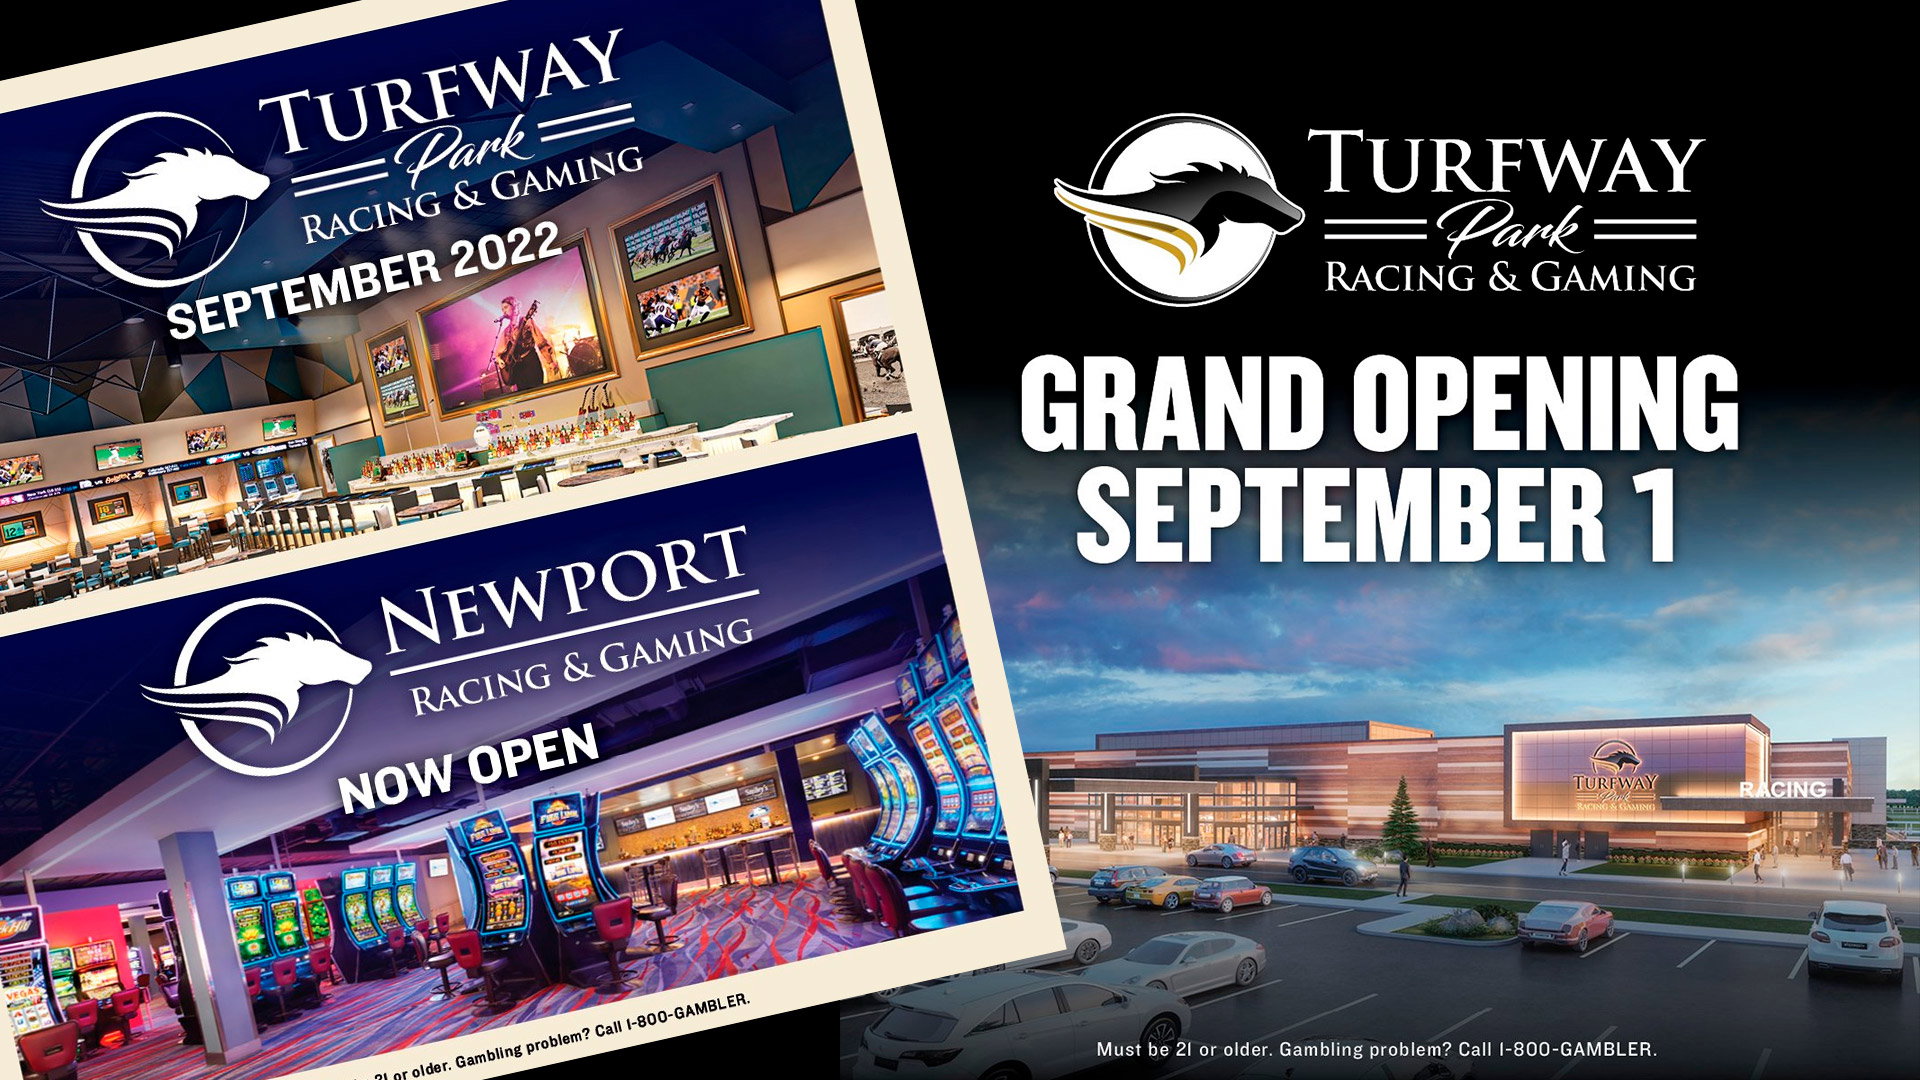 Kentucky Turfway Park Racing & Gaming to open Thursday after three